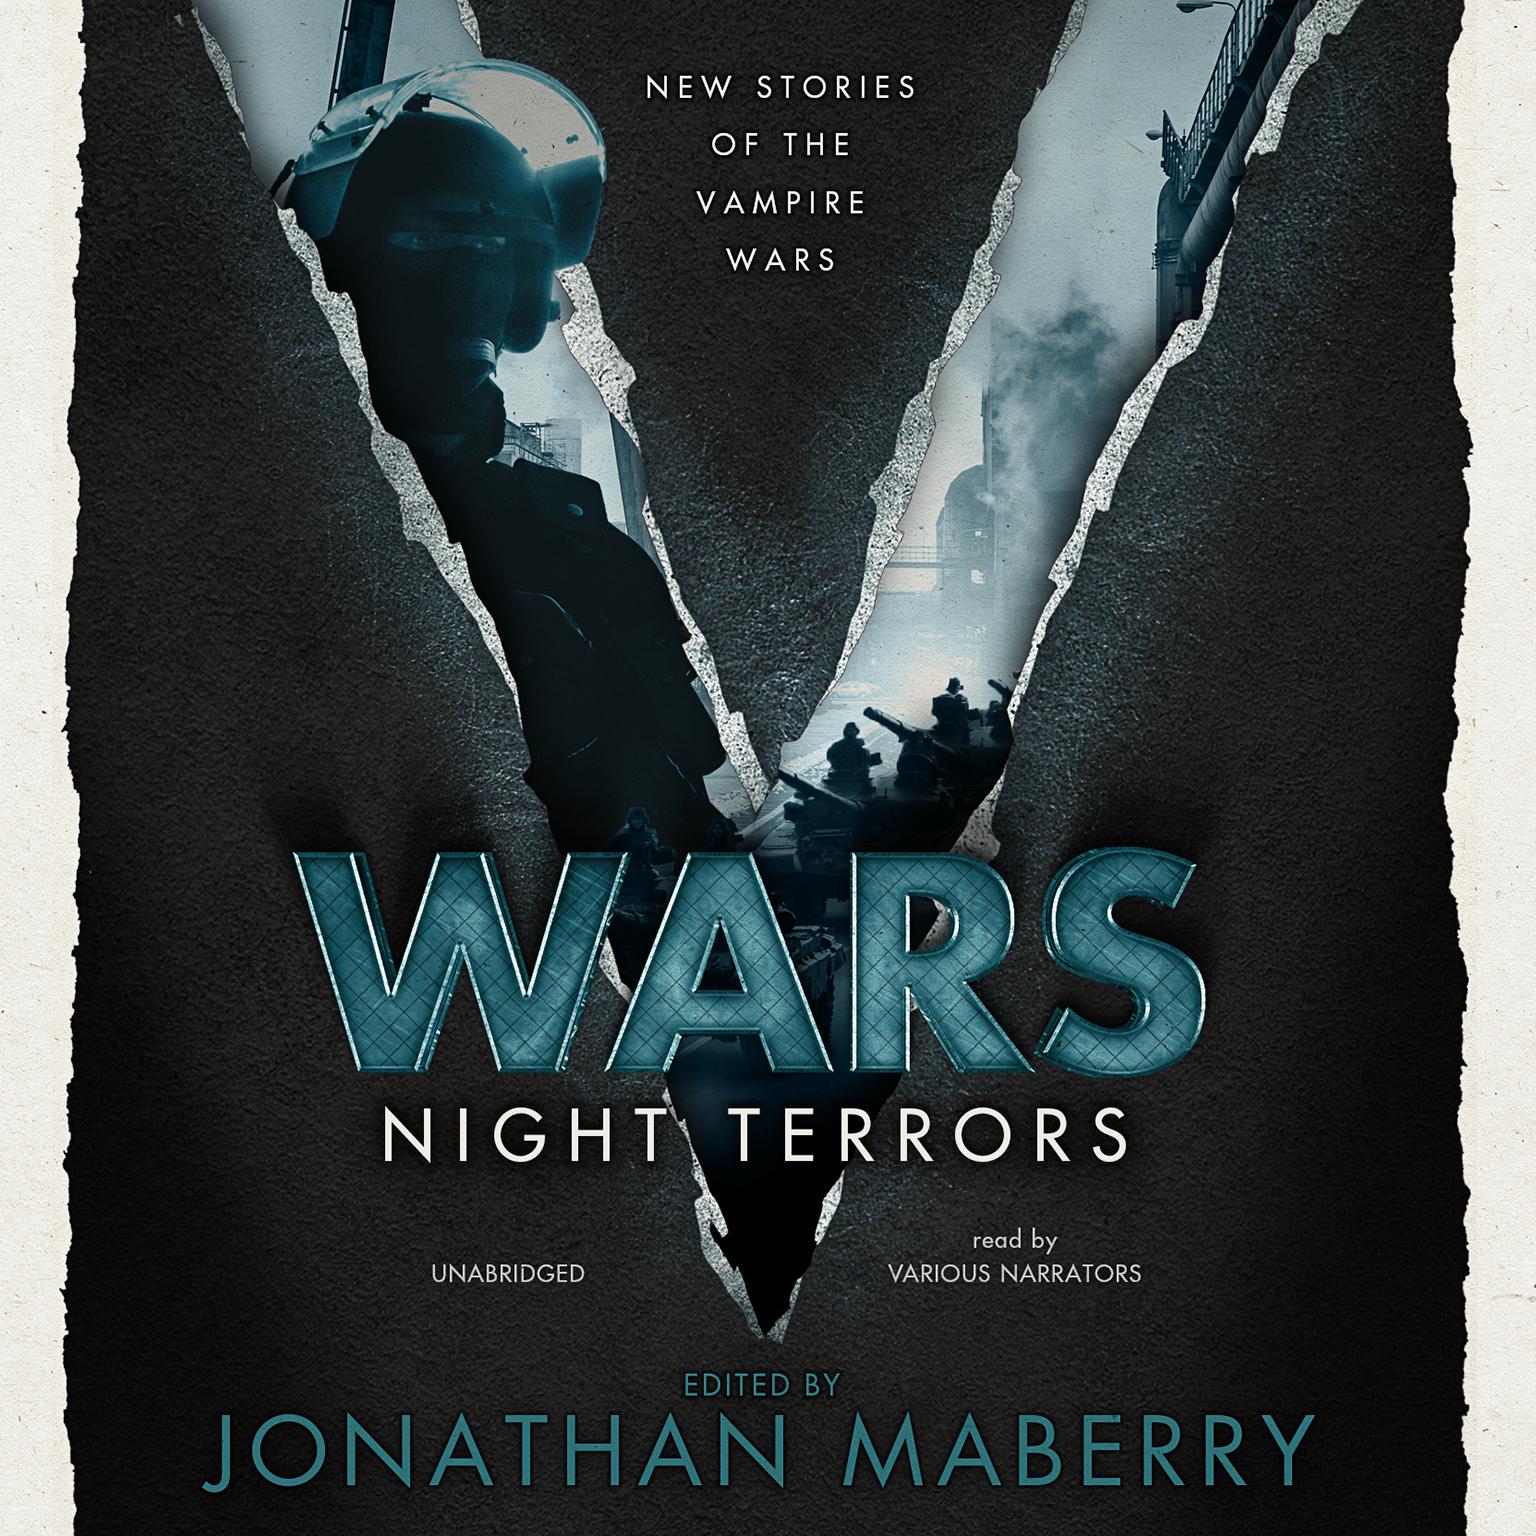 V Wars: Night Terrors: New Stories of the Vampire Wars Audiobook, by Jonathan Maberry